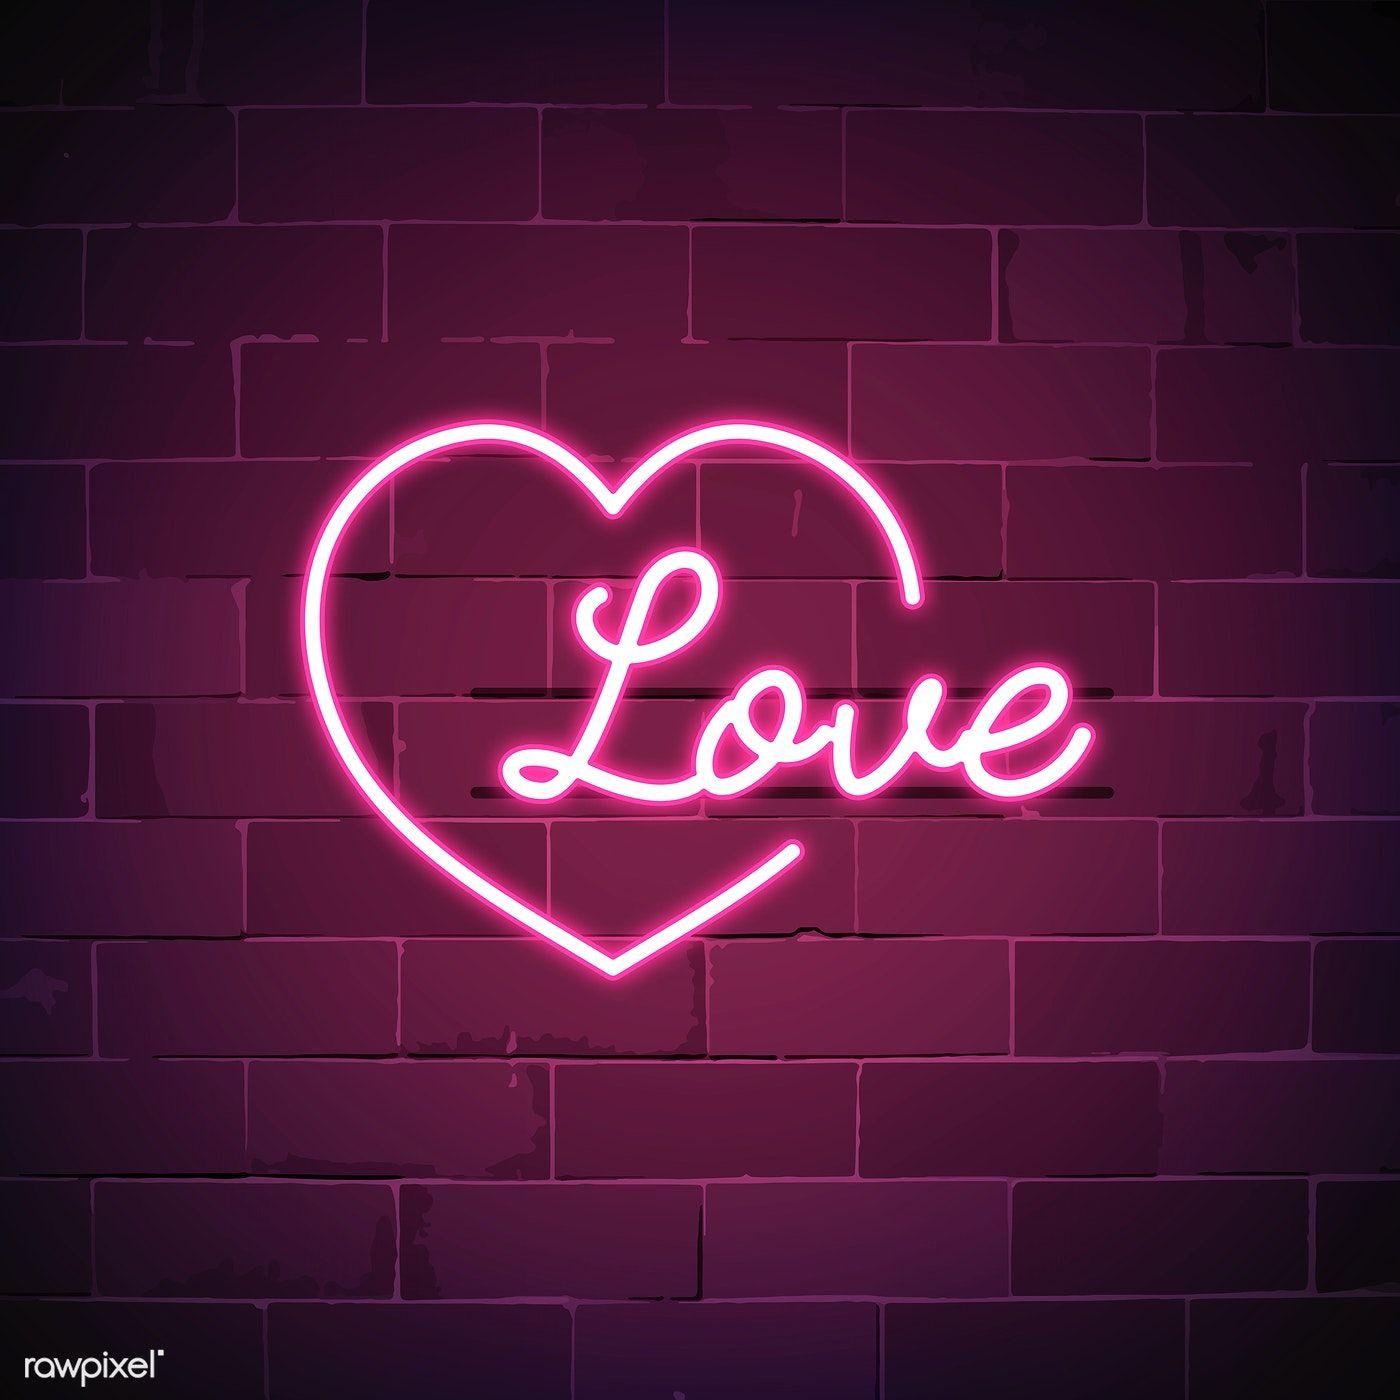 Cute Pink Neon Hearts Wallpapers - Top Free Cute Pink Neon Hearts ...